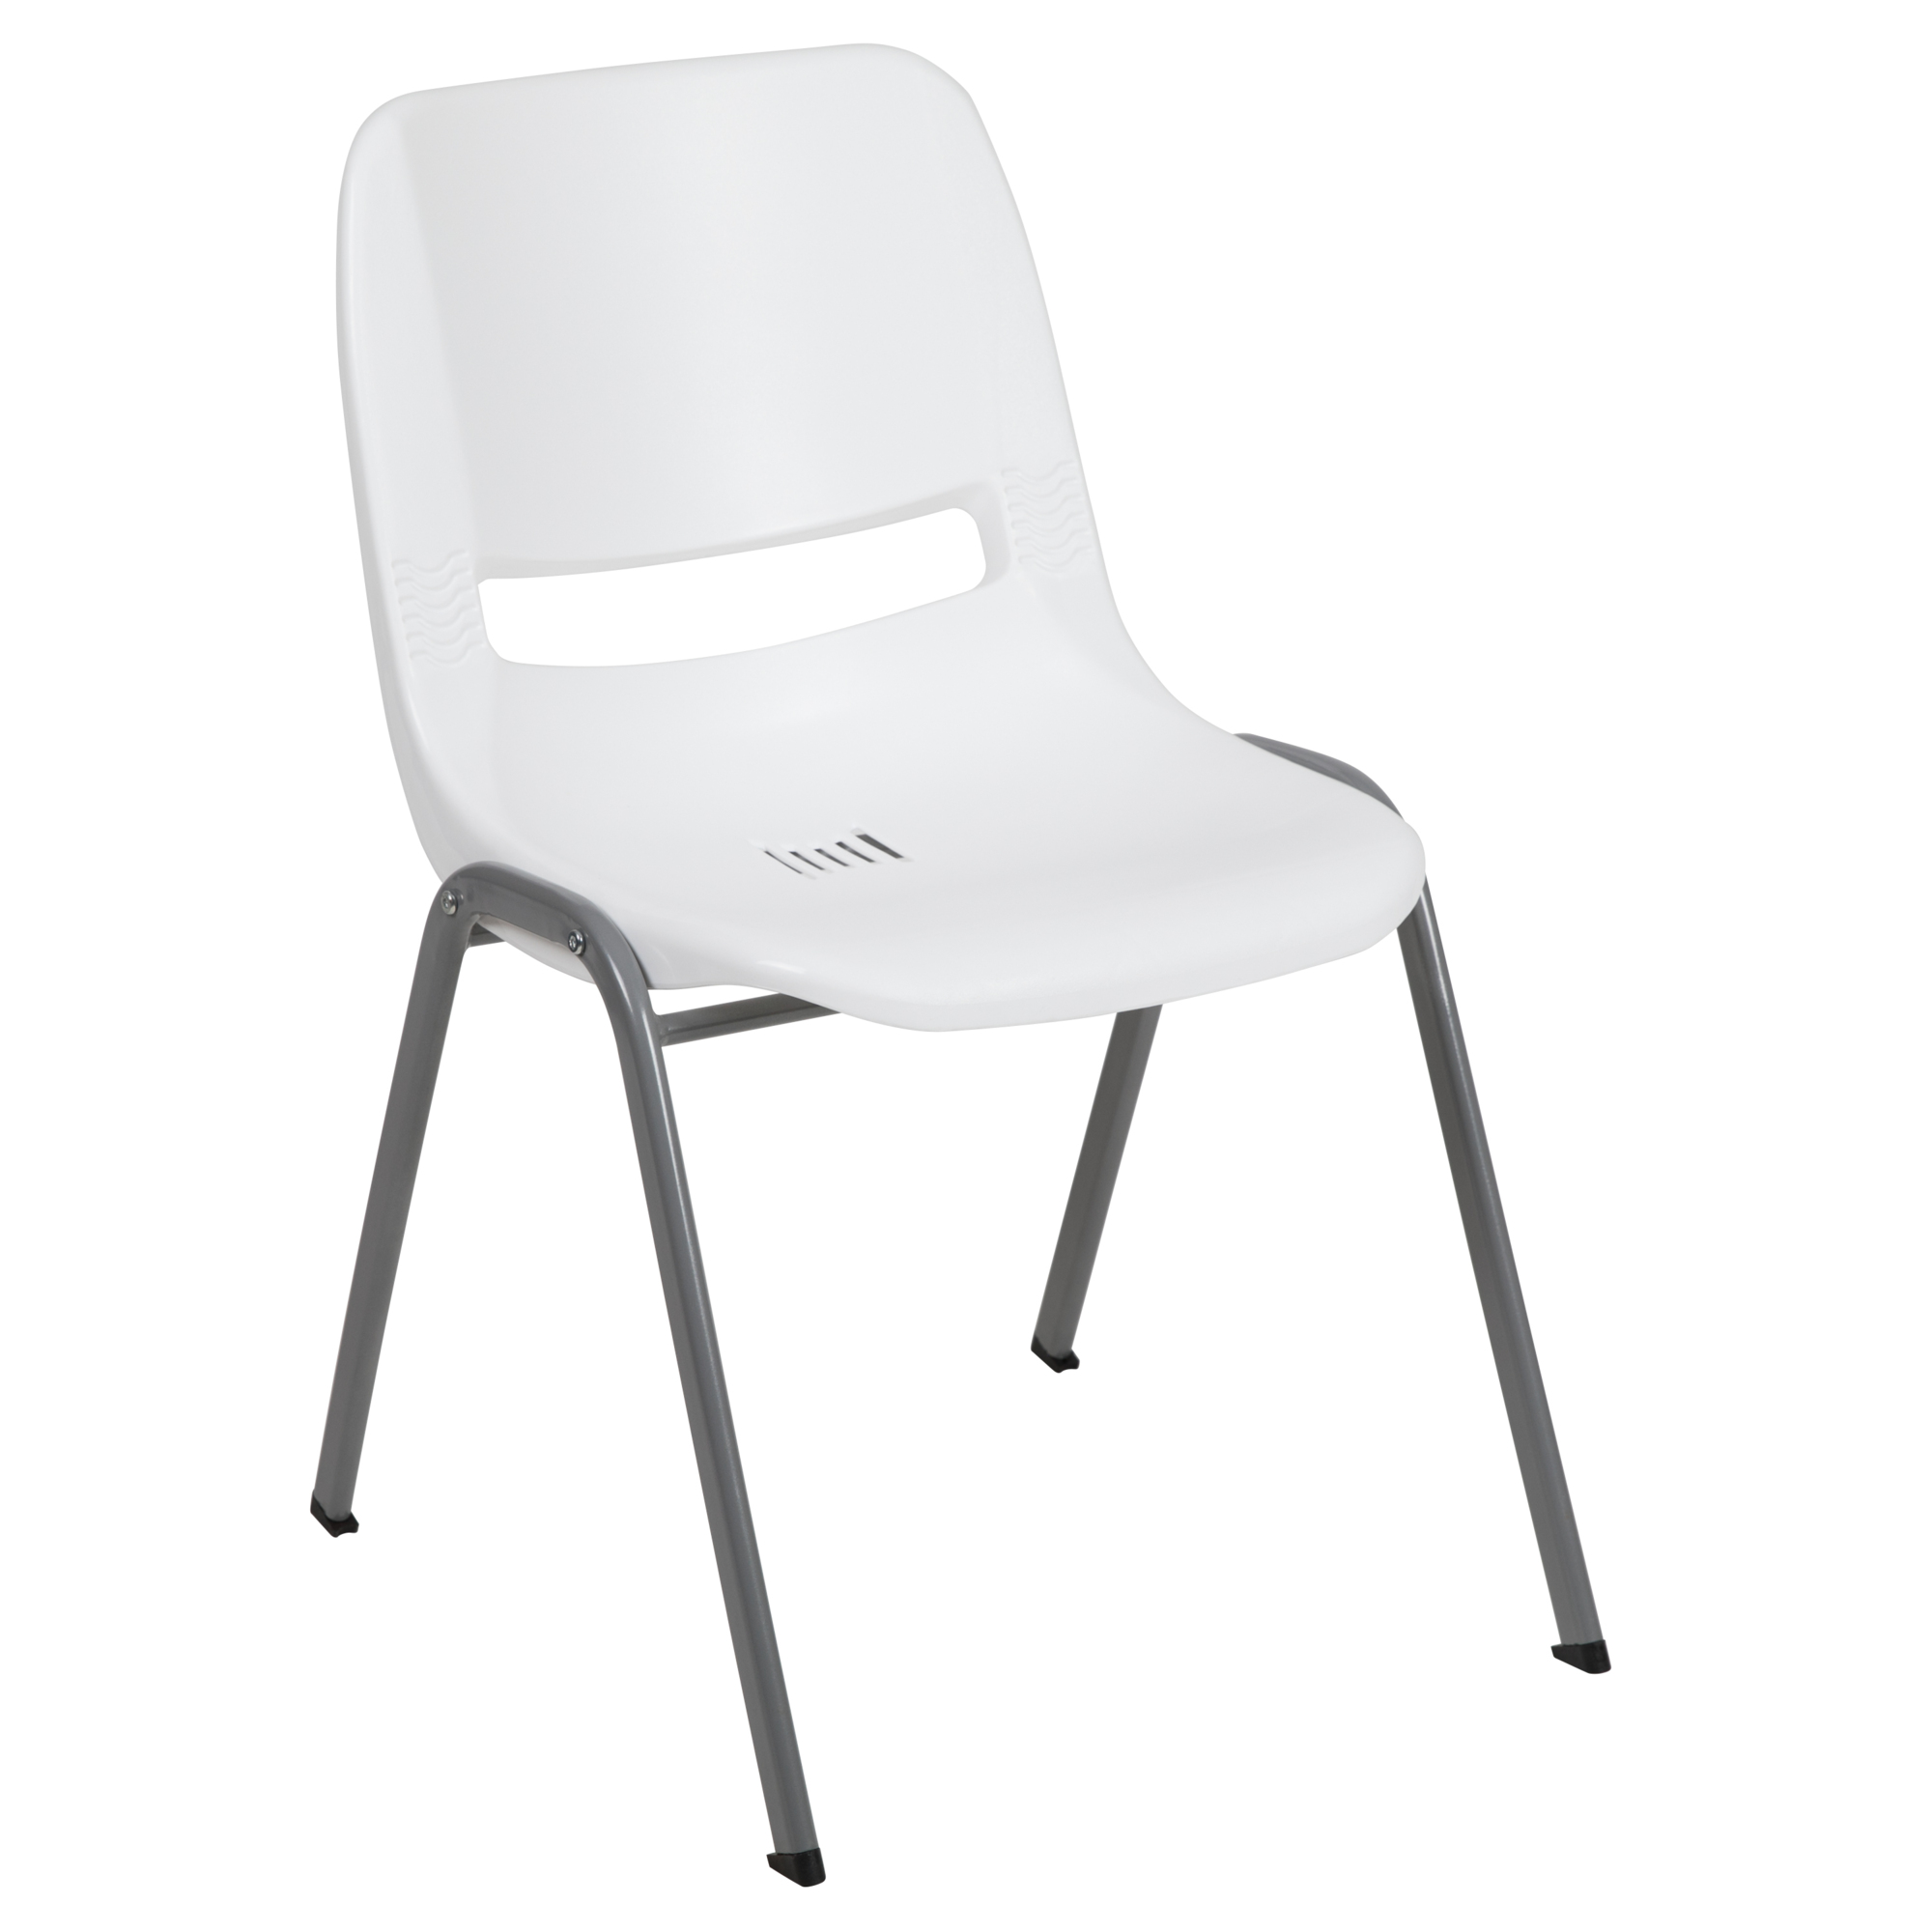 Flash Furniture, White Ergonomic Shell Student Stack Chair, Primary Color White, Included (qty.) 1, Model RUTEO1WH